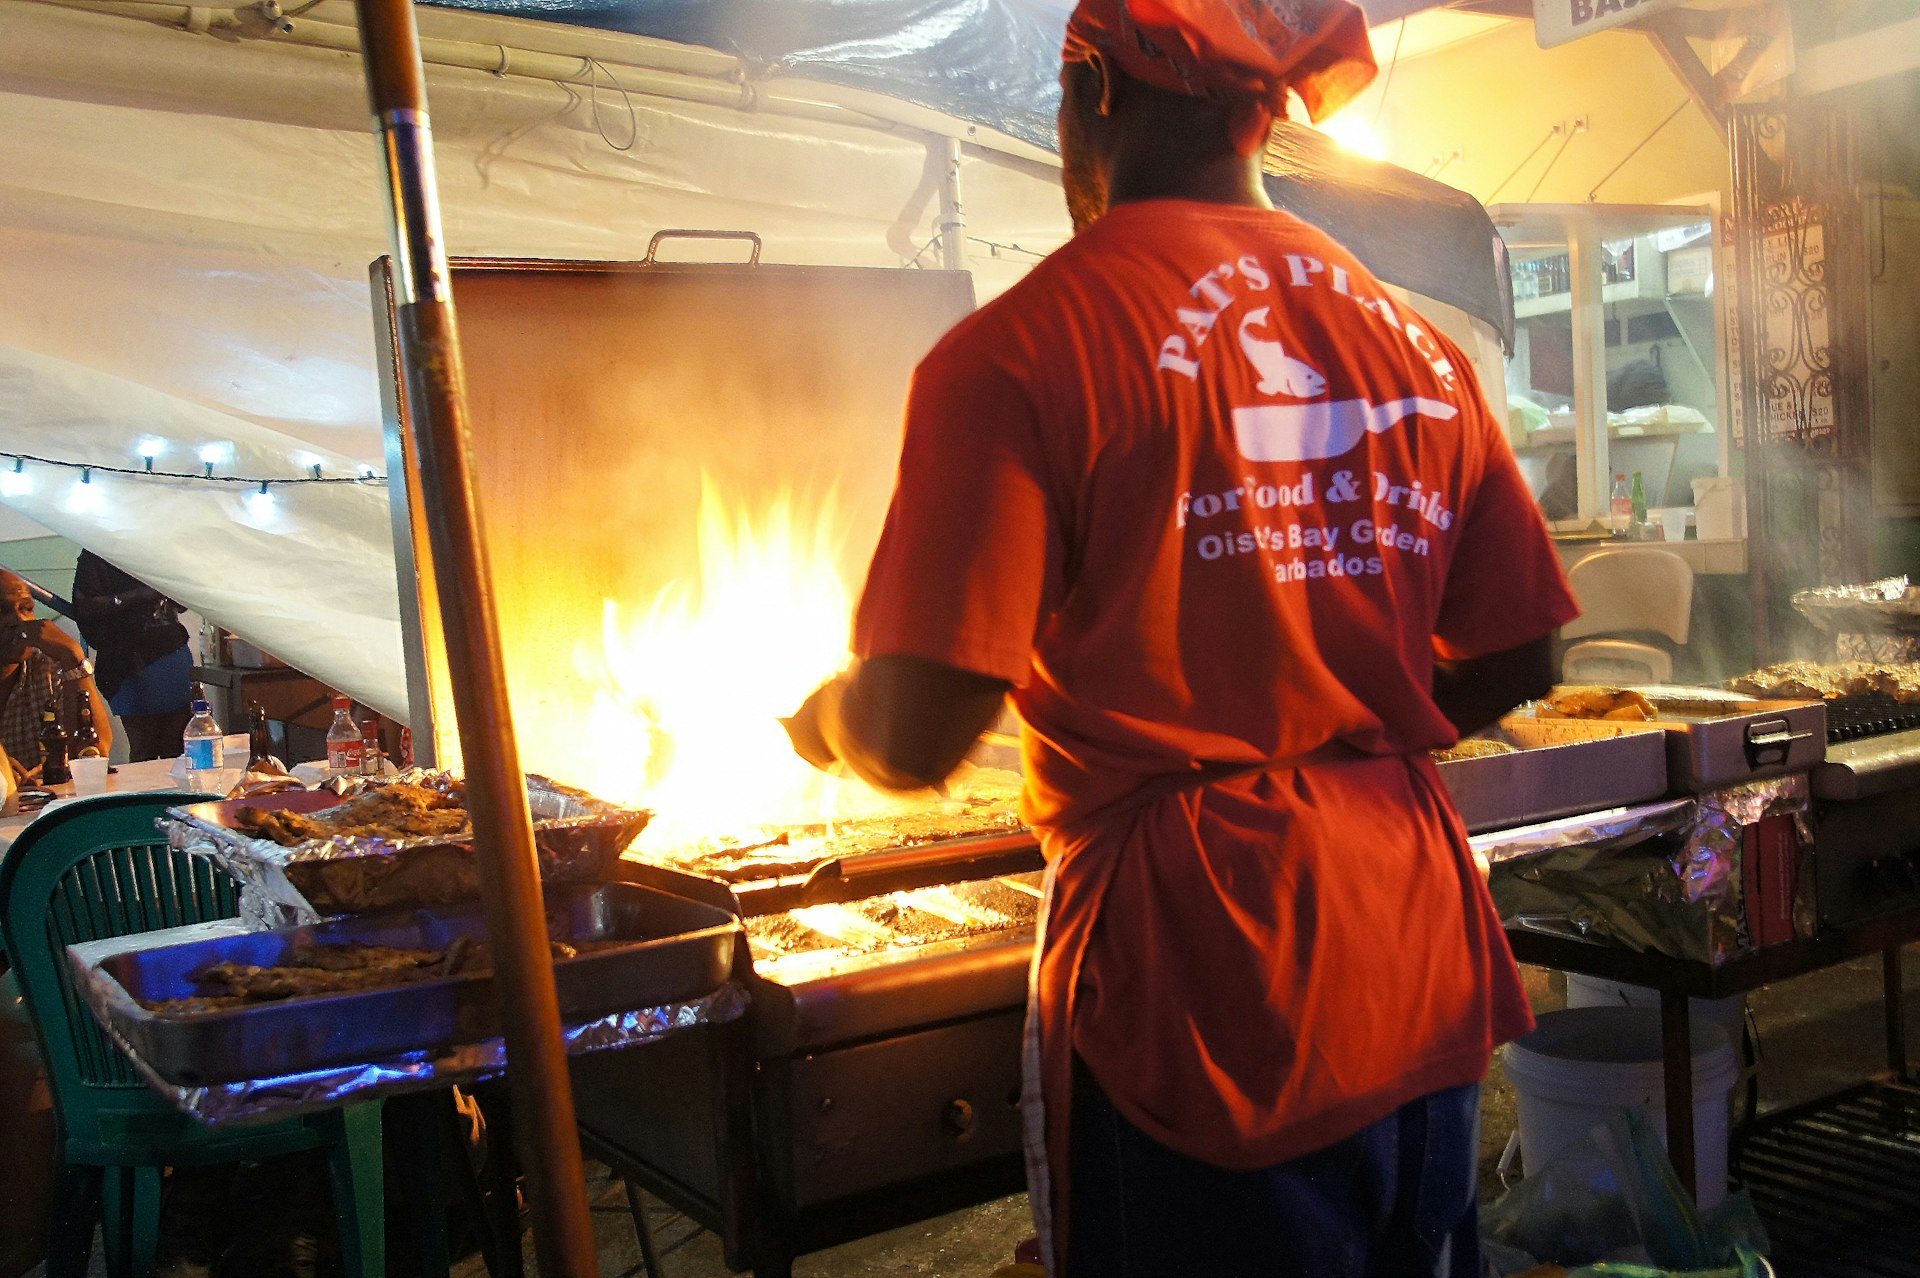 A local cooks up some fish in Oistins. Image by Dan Costin / CC by 